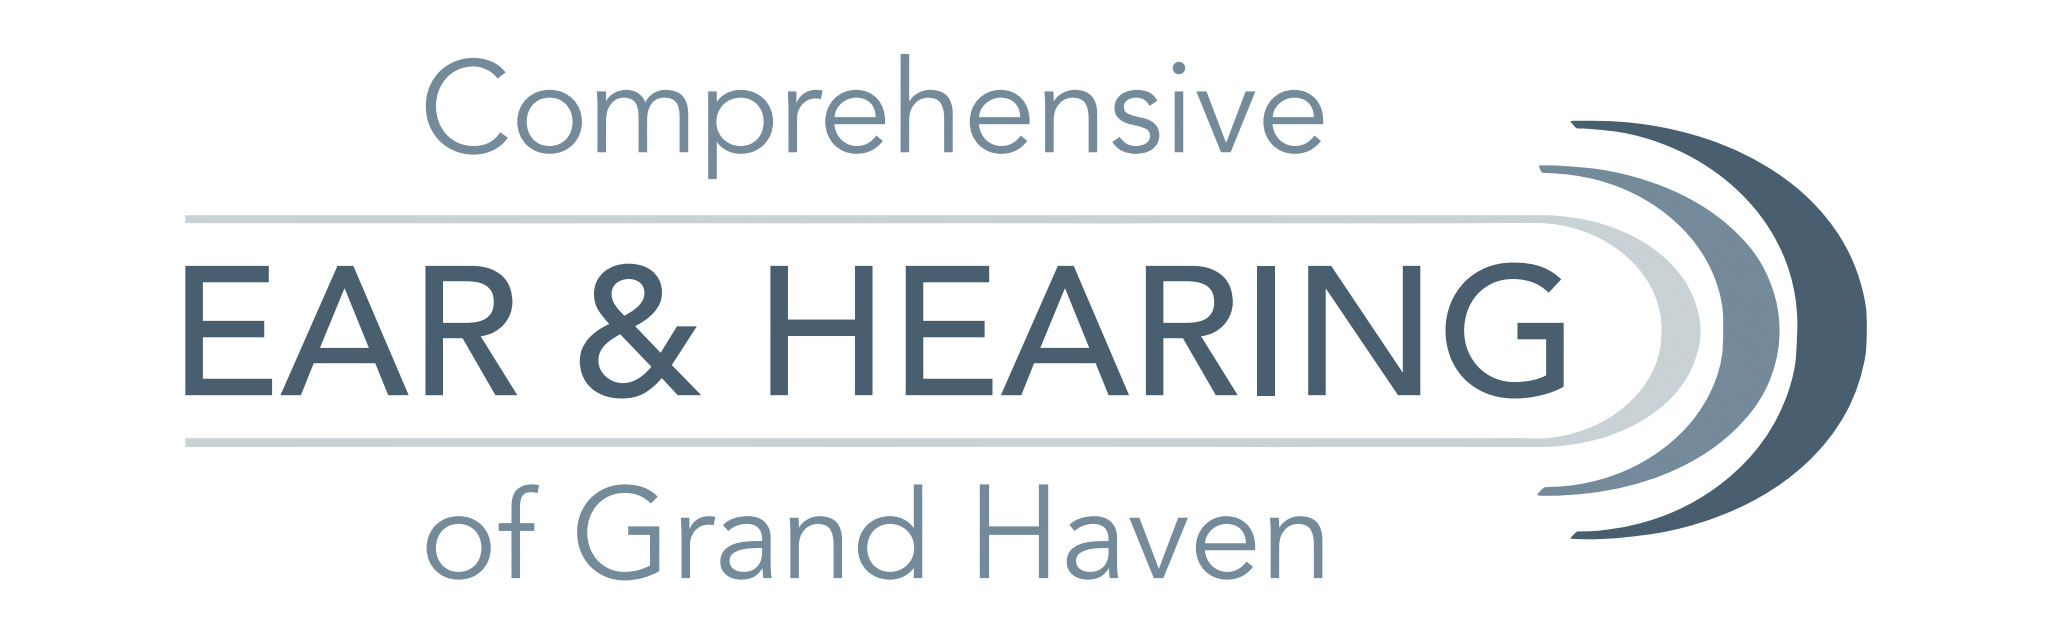 comprehensive-ear-and-hearing-grand-haven-logo